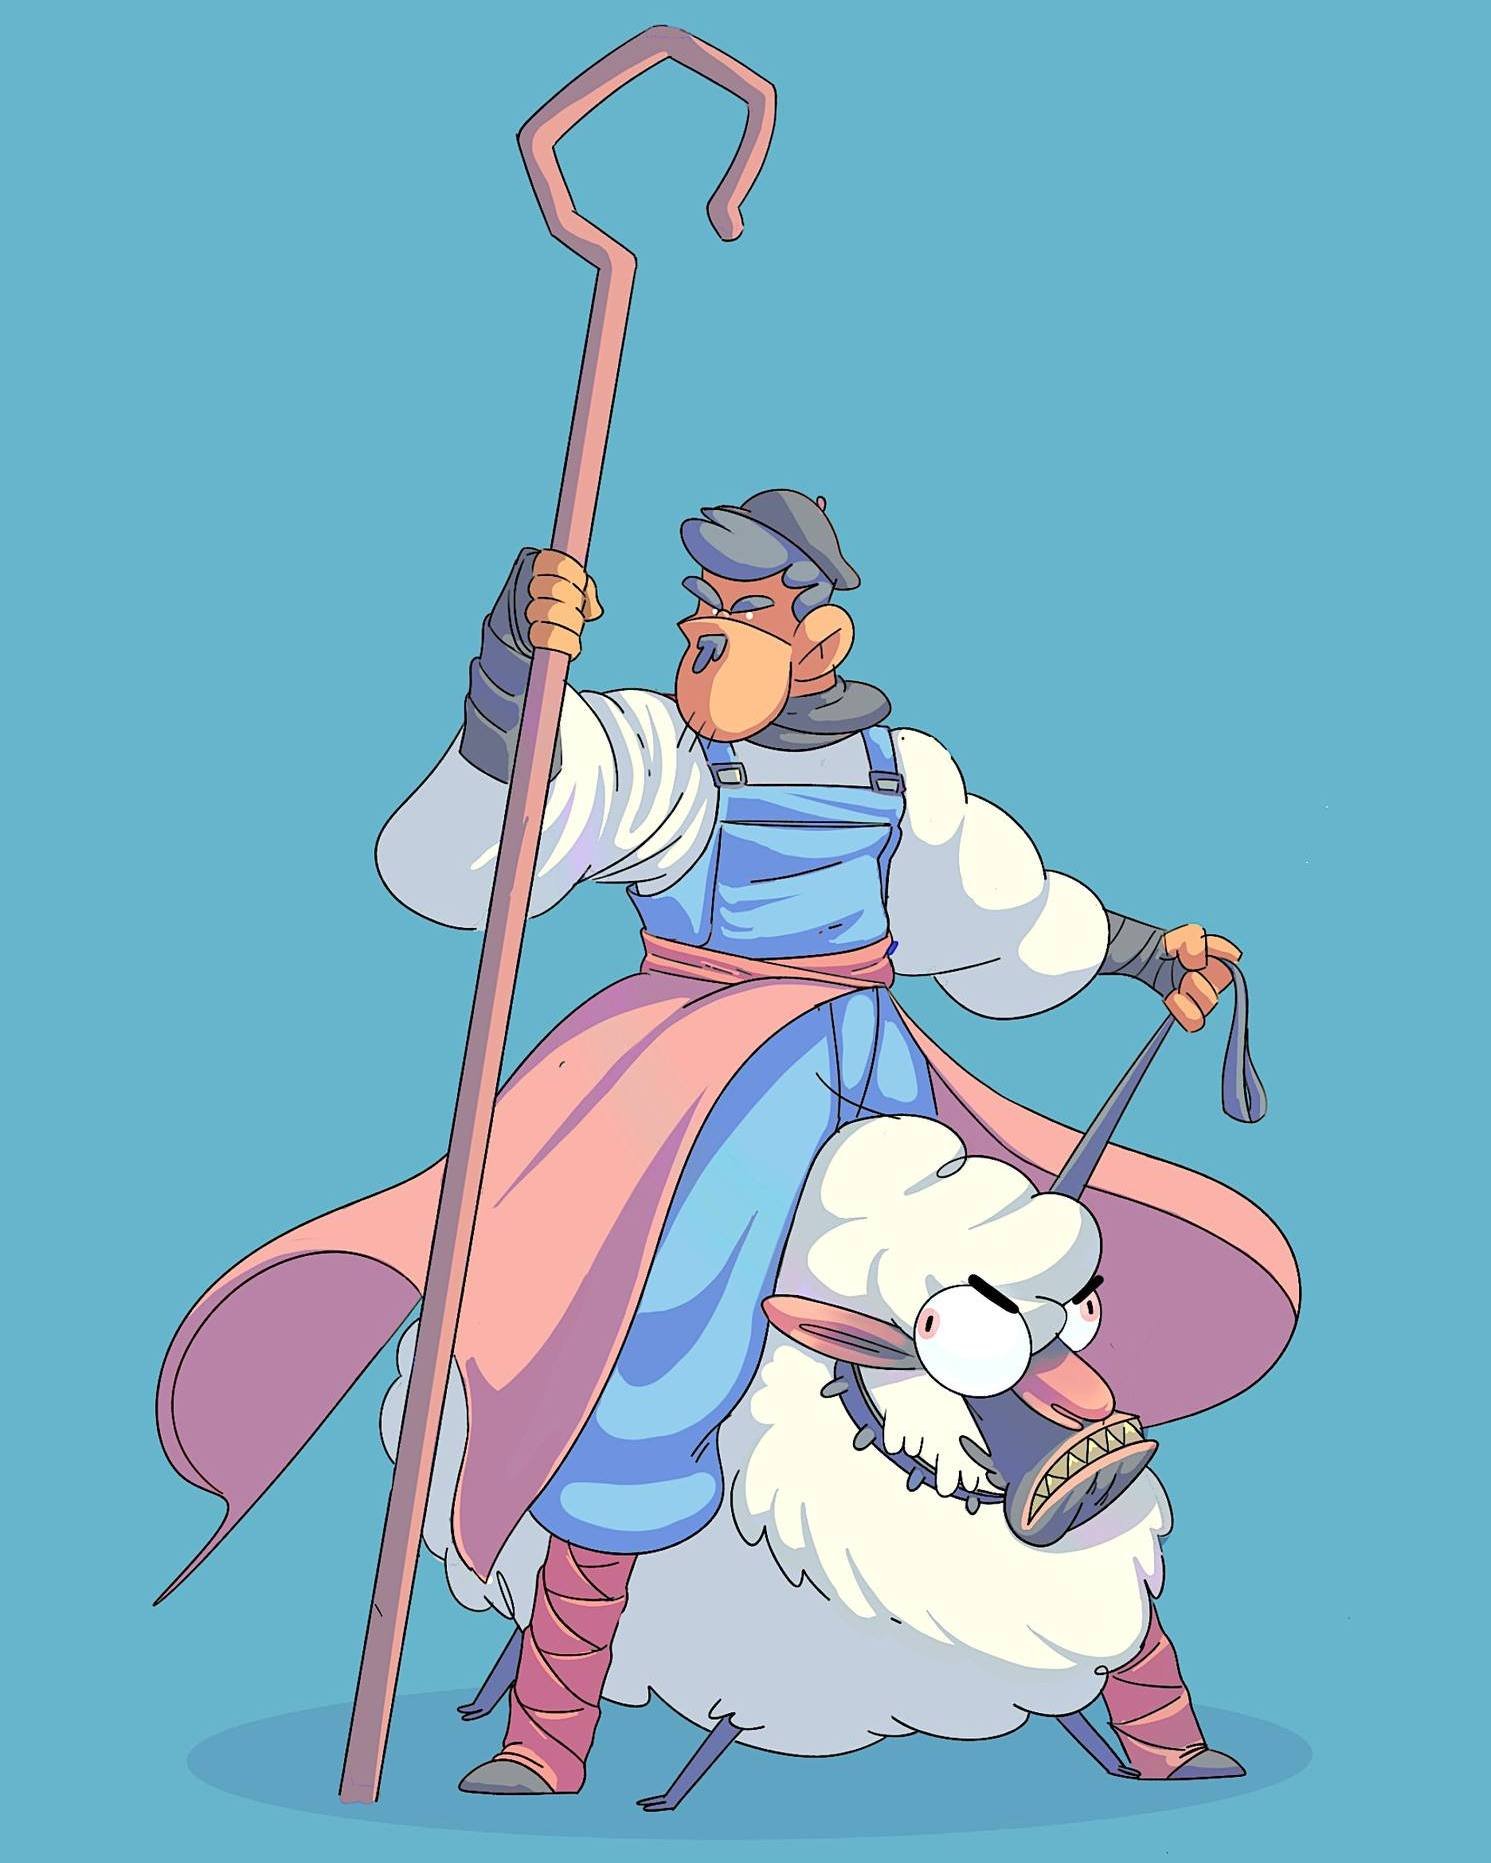 Submission by Hos Benamoche* ( @dieudevous ) for the #CDChallenge - the theme for April 2024 was #TravelingShepherd⠀⠀⠀⠀⠀⁣⠀⁣⠀⠀⠀⁠⠀⁠⠀⁠⠀⁠⠀⁠⠀⁠⠀⁠⠀⁠⠀
.⠀⠀⠀⠀⠀⠀⁣⠀⁣⠀⠀⠀⁠⠀⁠⠀⁠⠀⁠⠀⁠⠀⁠⠀⁠⠀⁠⠀
.⠀⠀⠀⠀⠀⠀⁣⠀⁣⠀⠀⠀⁠⠀⁠⠀⁠⠀⁠⠀⁠⠀⁠⠀⁠⠀⁠⠀
.⠀⠀⠀⠀⠀⠀⁣⠀⁣⠀⠀⠀⁠⠀⁠⠀⁠⠀⁠⠀⁠⠀⁠⠀⁠⠀⁠⠀
Presented by #Cha